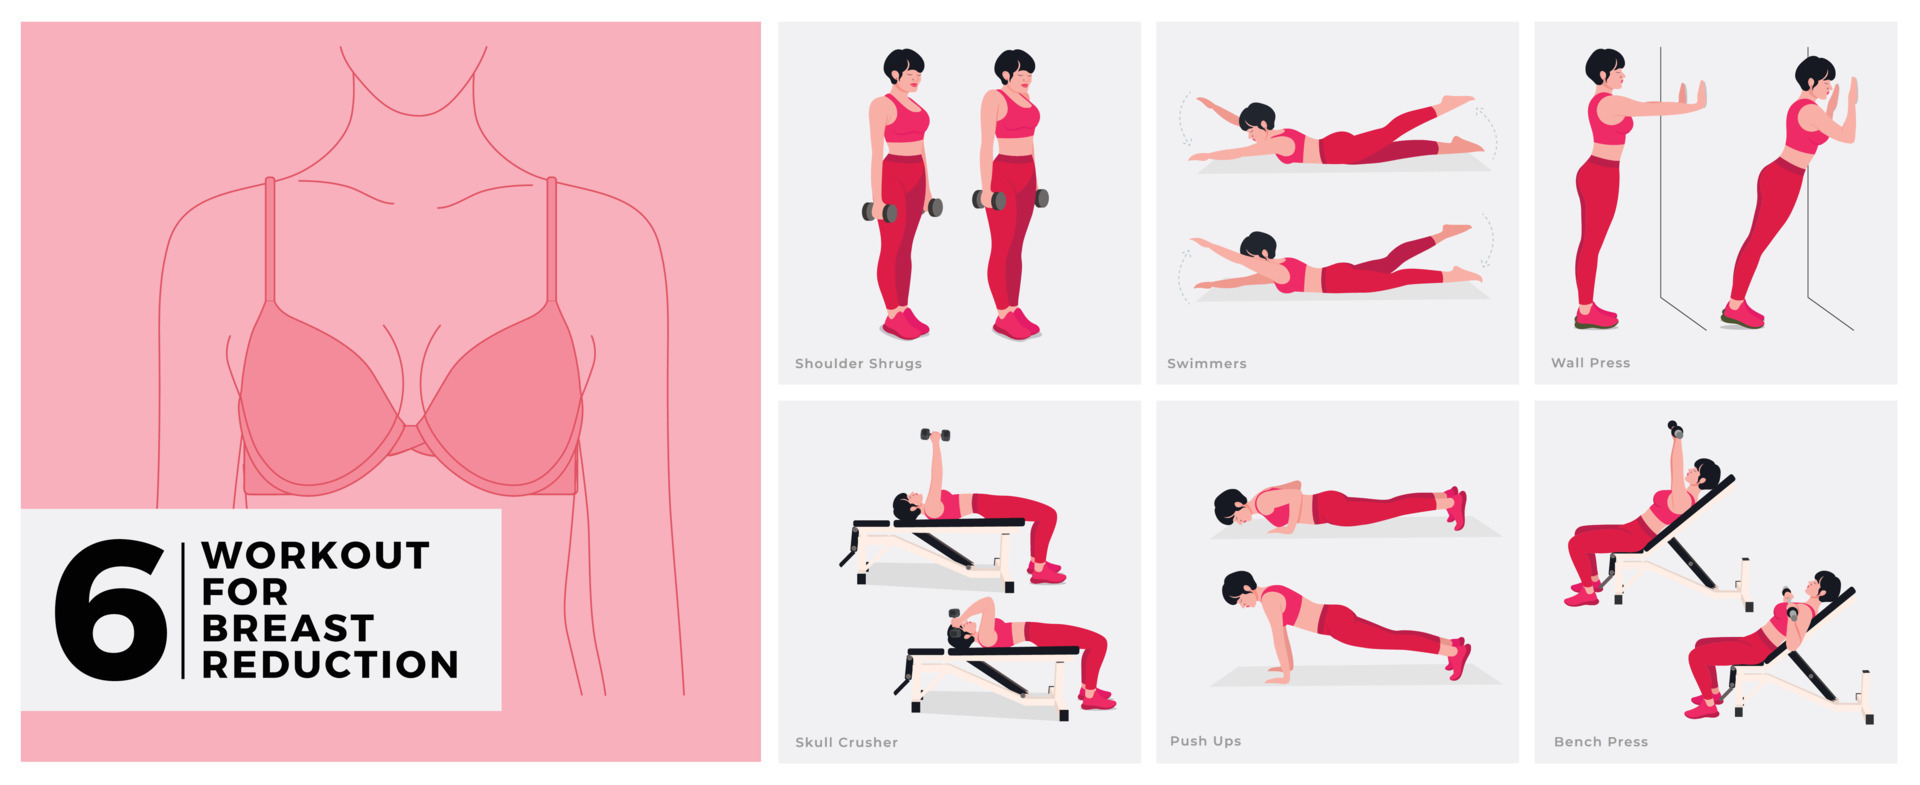 https://static.vecteezy.com/system/resources/previews/010/826/257/original/workout-exercises-for-breast-reduction-women-doing-fitness-and-yoga-exercises-vector.jpg